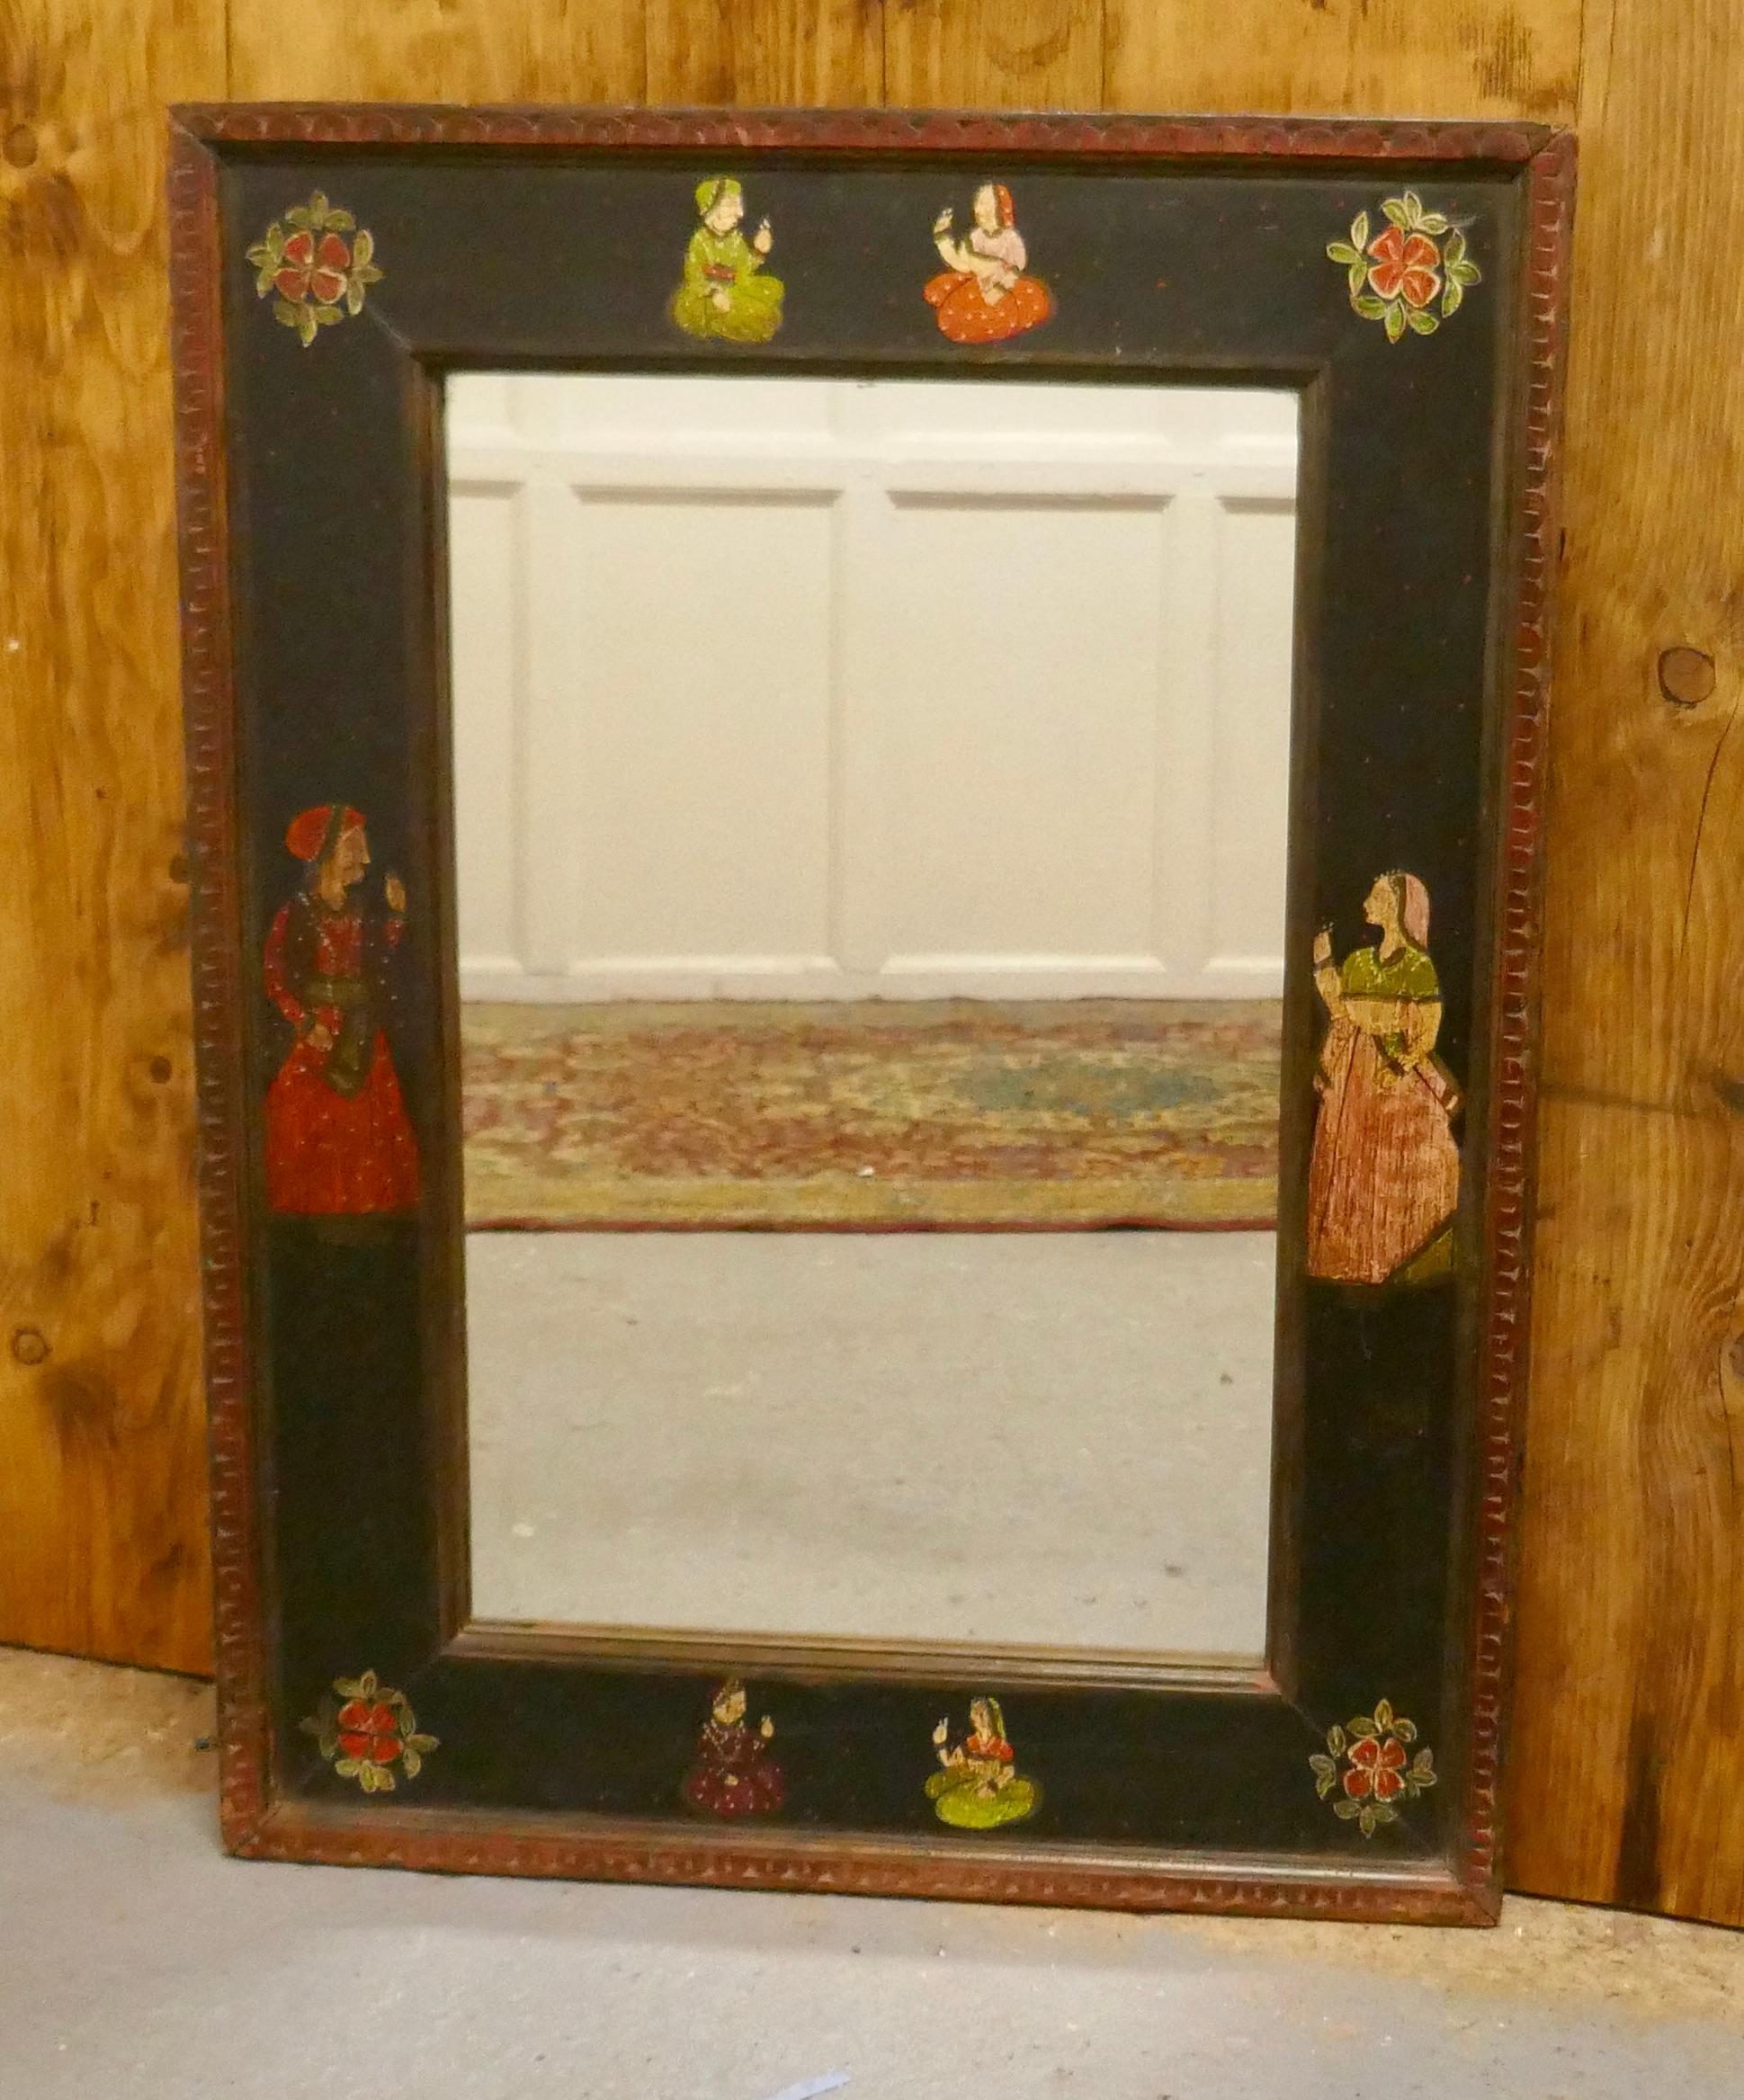 Anglo-Indian Folk Art painted wall mirror 

 The mirror frame is 4.5” wide it has a carved edge and it is decoratively hand painted, the primitive folk art depicts flowers and characters from India
The glass is new so this in good condition, the